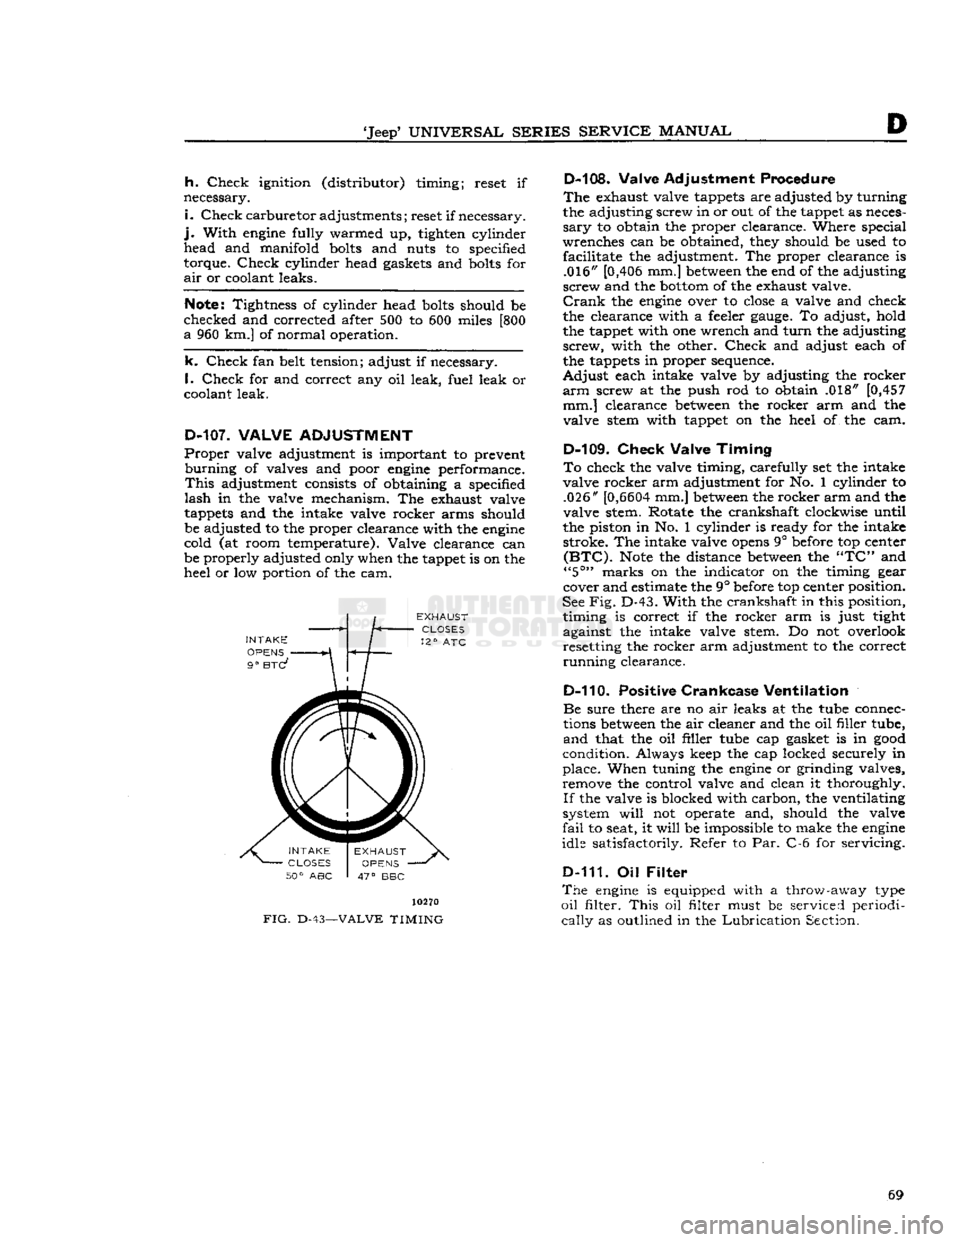 JEEP DJ 1953  Service Manual 
Jeep9
 UNIVERSAL
 SERIES
 SERVICE
 MANUAL 

h.
 Check
 ignition (distributor) timing; reset if 
necessary. 

i.
 Check
 carburetor
 adjustments; reset if necessary, 

j.
 With
 engine
 fully warmed 